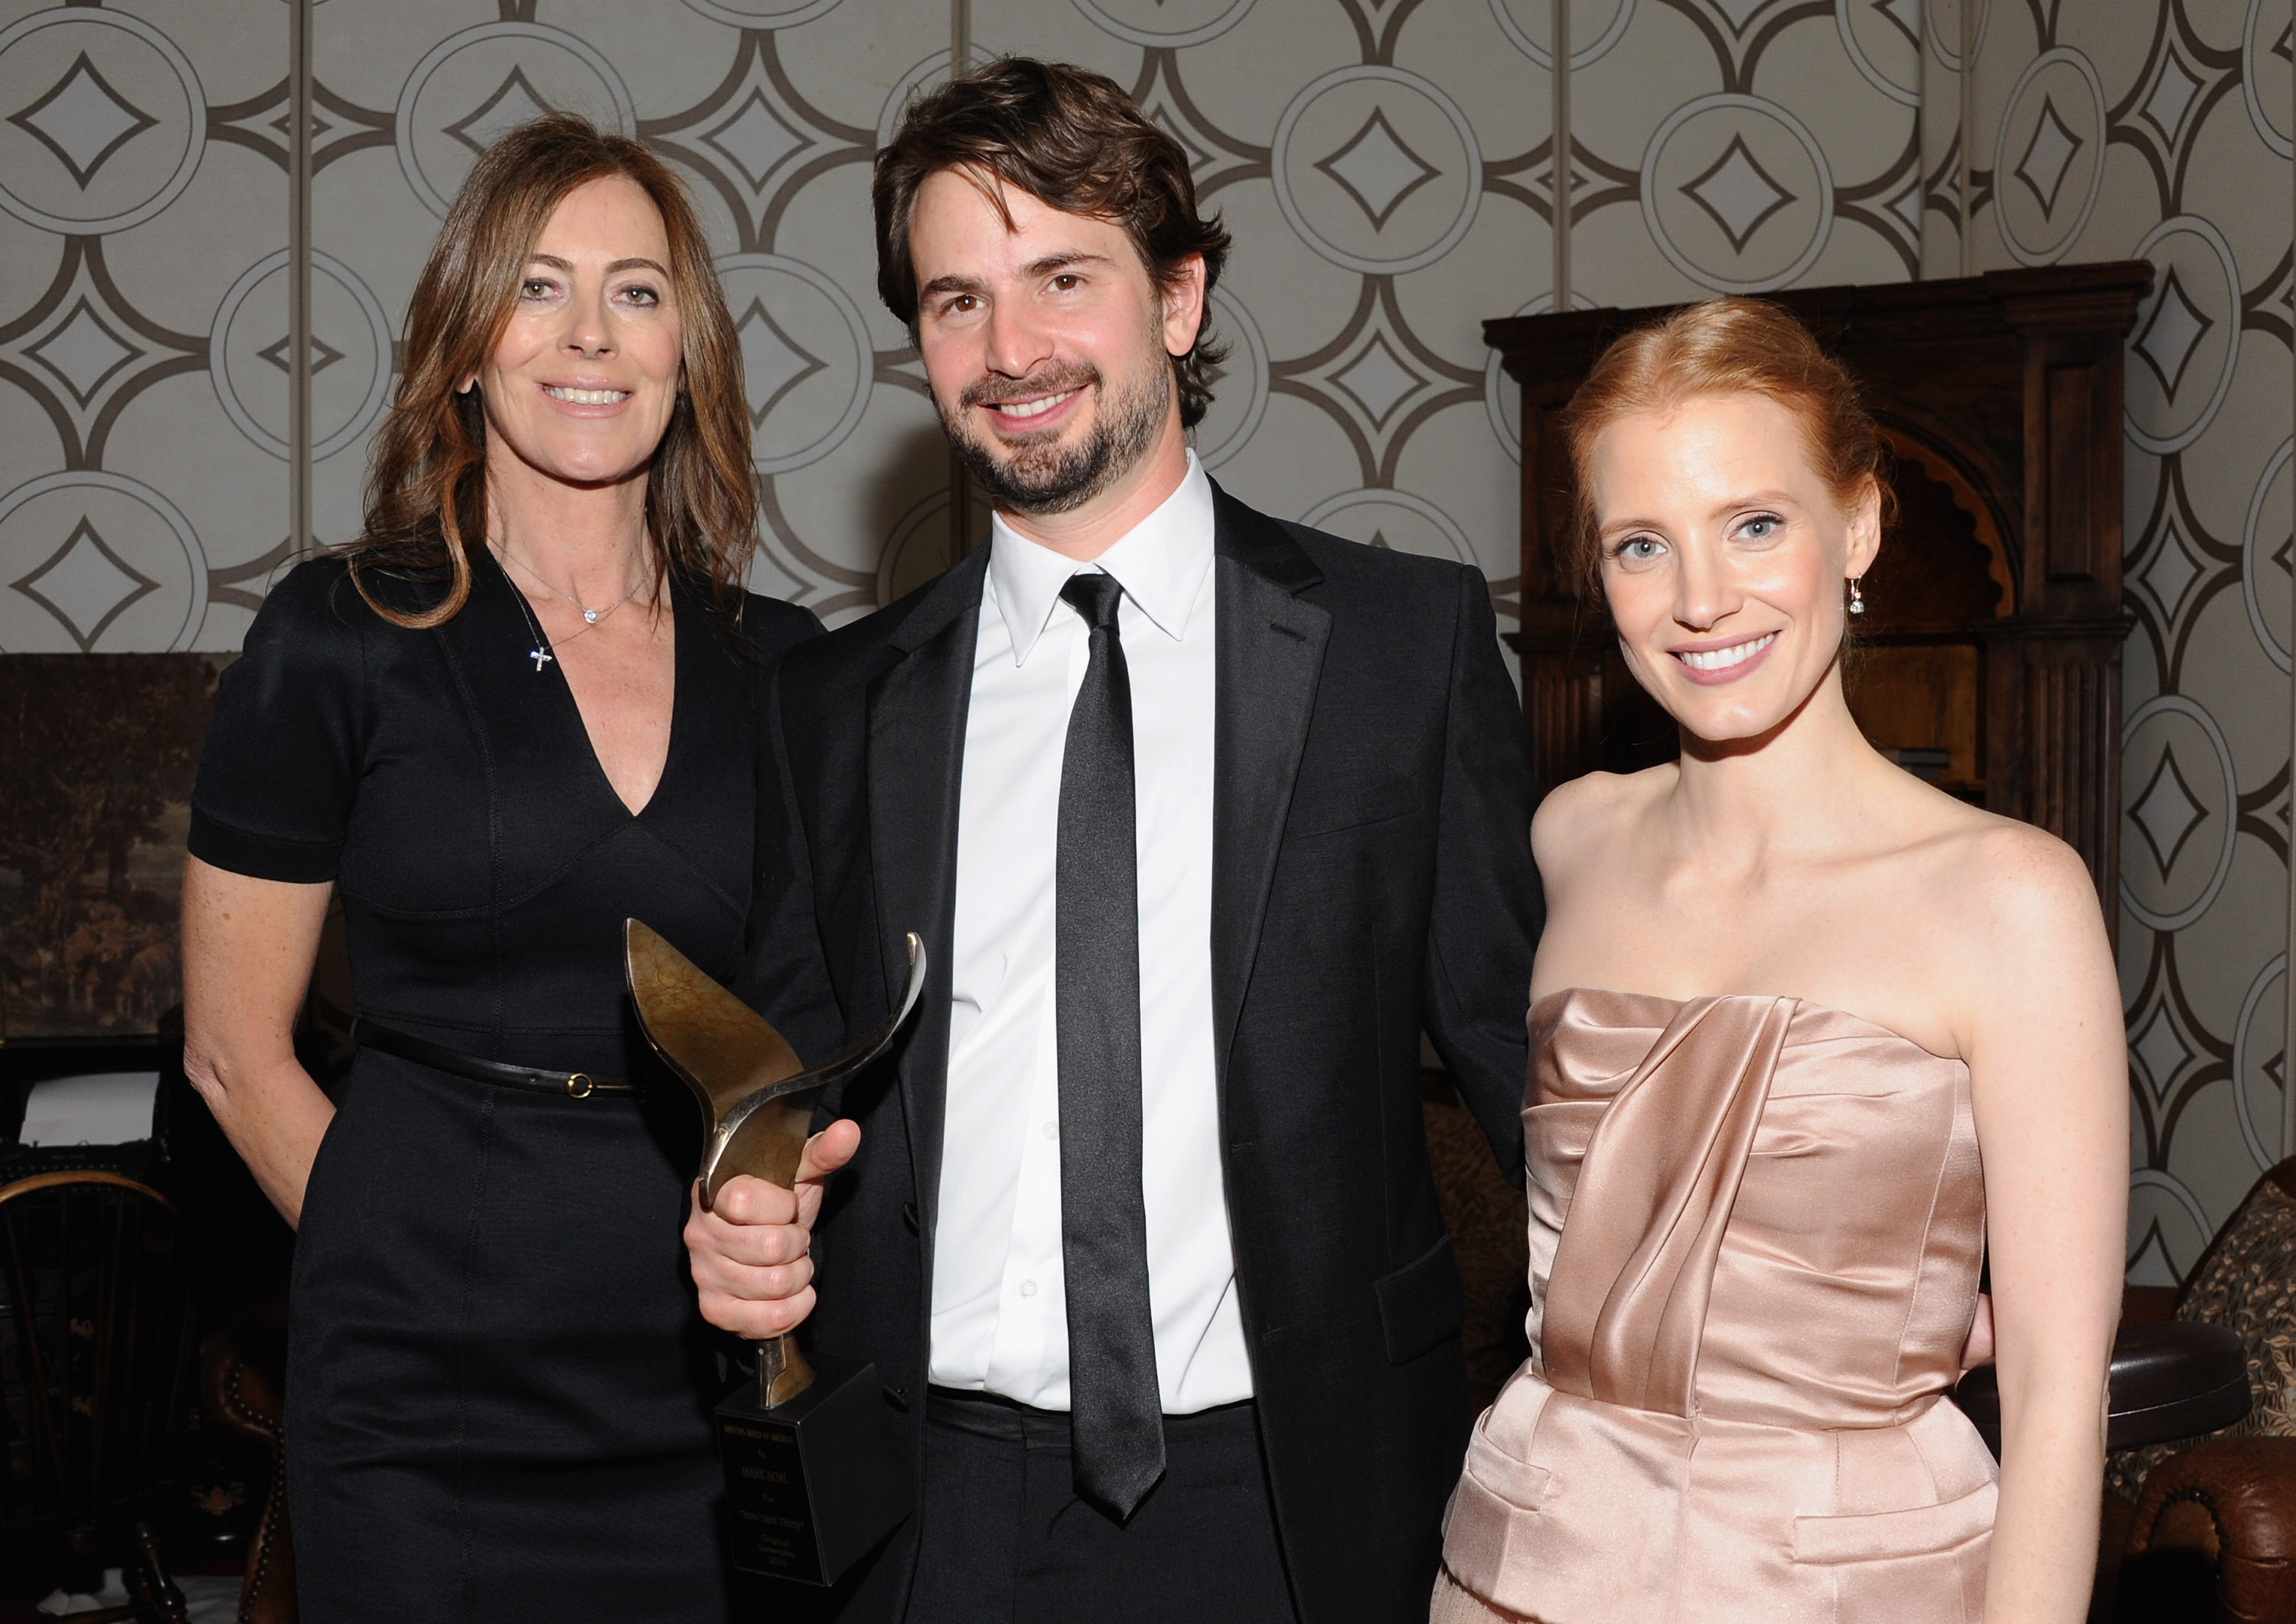 LOS ANGELES, CA - FEBRUARY 17:  Director Kathryn Bigelow, writer Mark Boal and actress Jessica Chastain in the 2013 Writers Guild Awards Backstage Creations Celebrity Retreat on February 17, 2013 in Los Angeles, California.  (Photo by Mark Sullivan/WireImage)